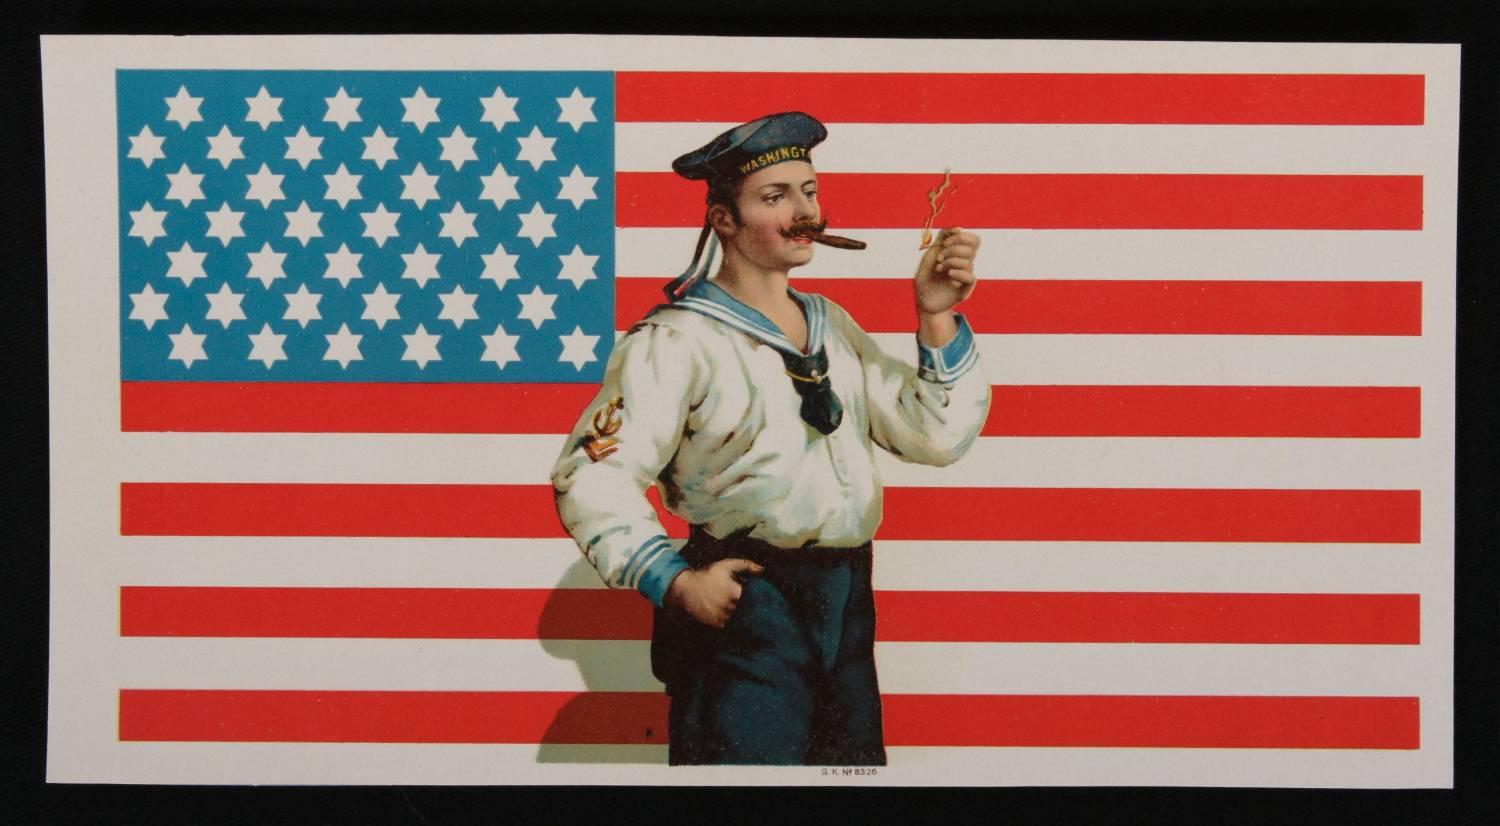 CIGAR BOX LABEL WITH IMAGE OF A 42-STAR AMERICAN FLAG WITH SIX-POINTED STARS AND IT'S BLUE CANTON RESTING ON THE WAR STRIPE, AND AN IMAGE OF A SAILOR LIGHTING A CIGAR, 1889-1920: 

This interesting, late 19th or early 20th century (ca 1889-1920)